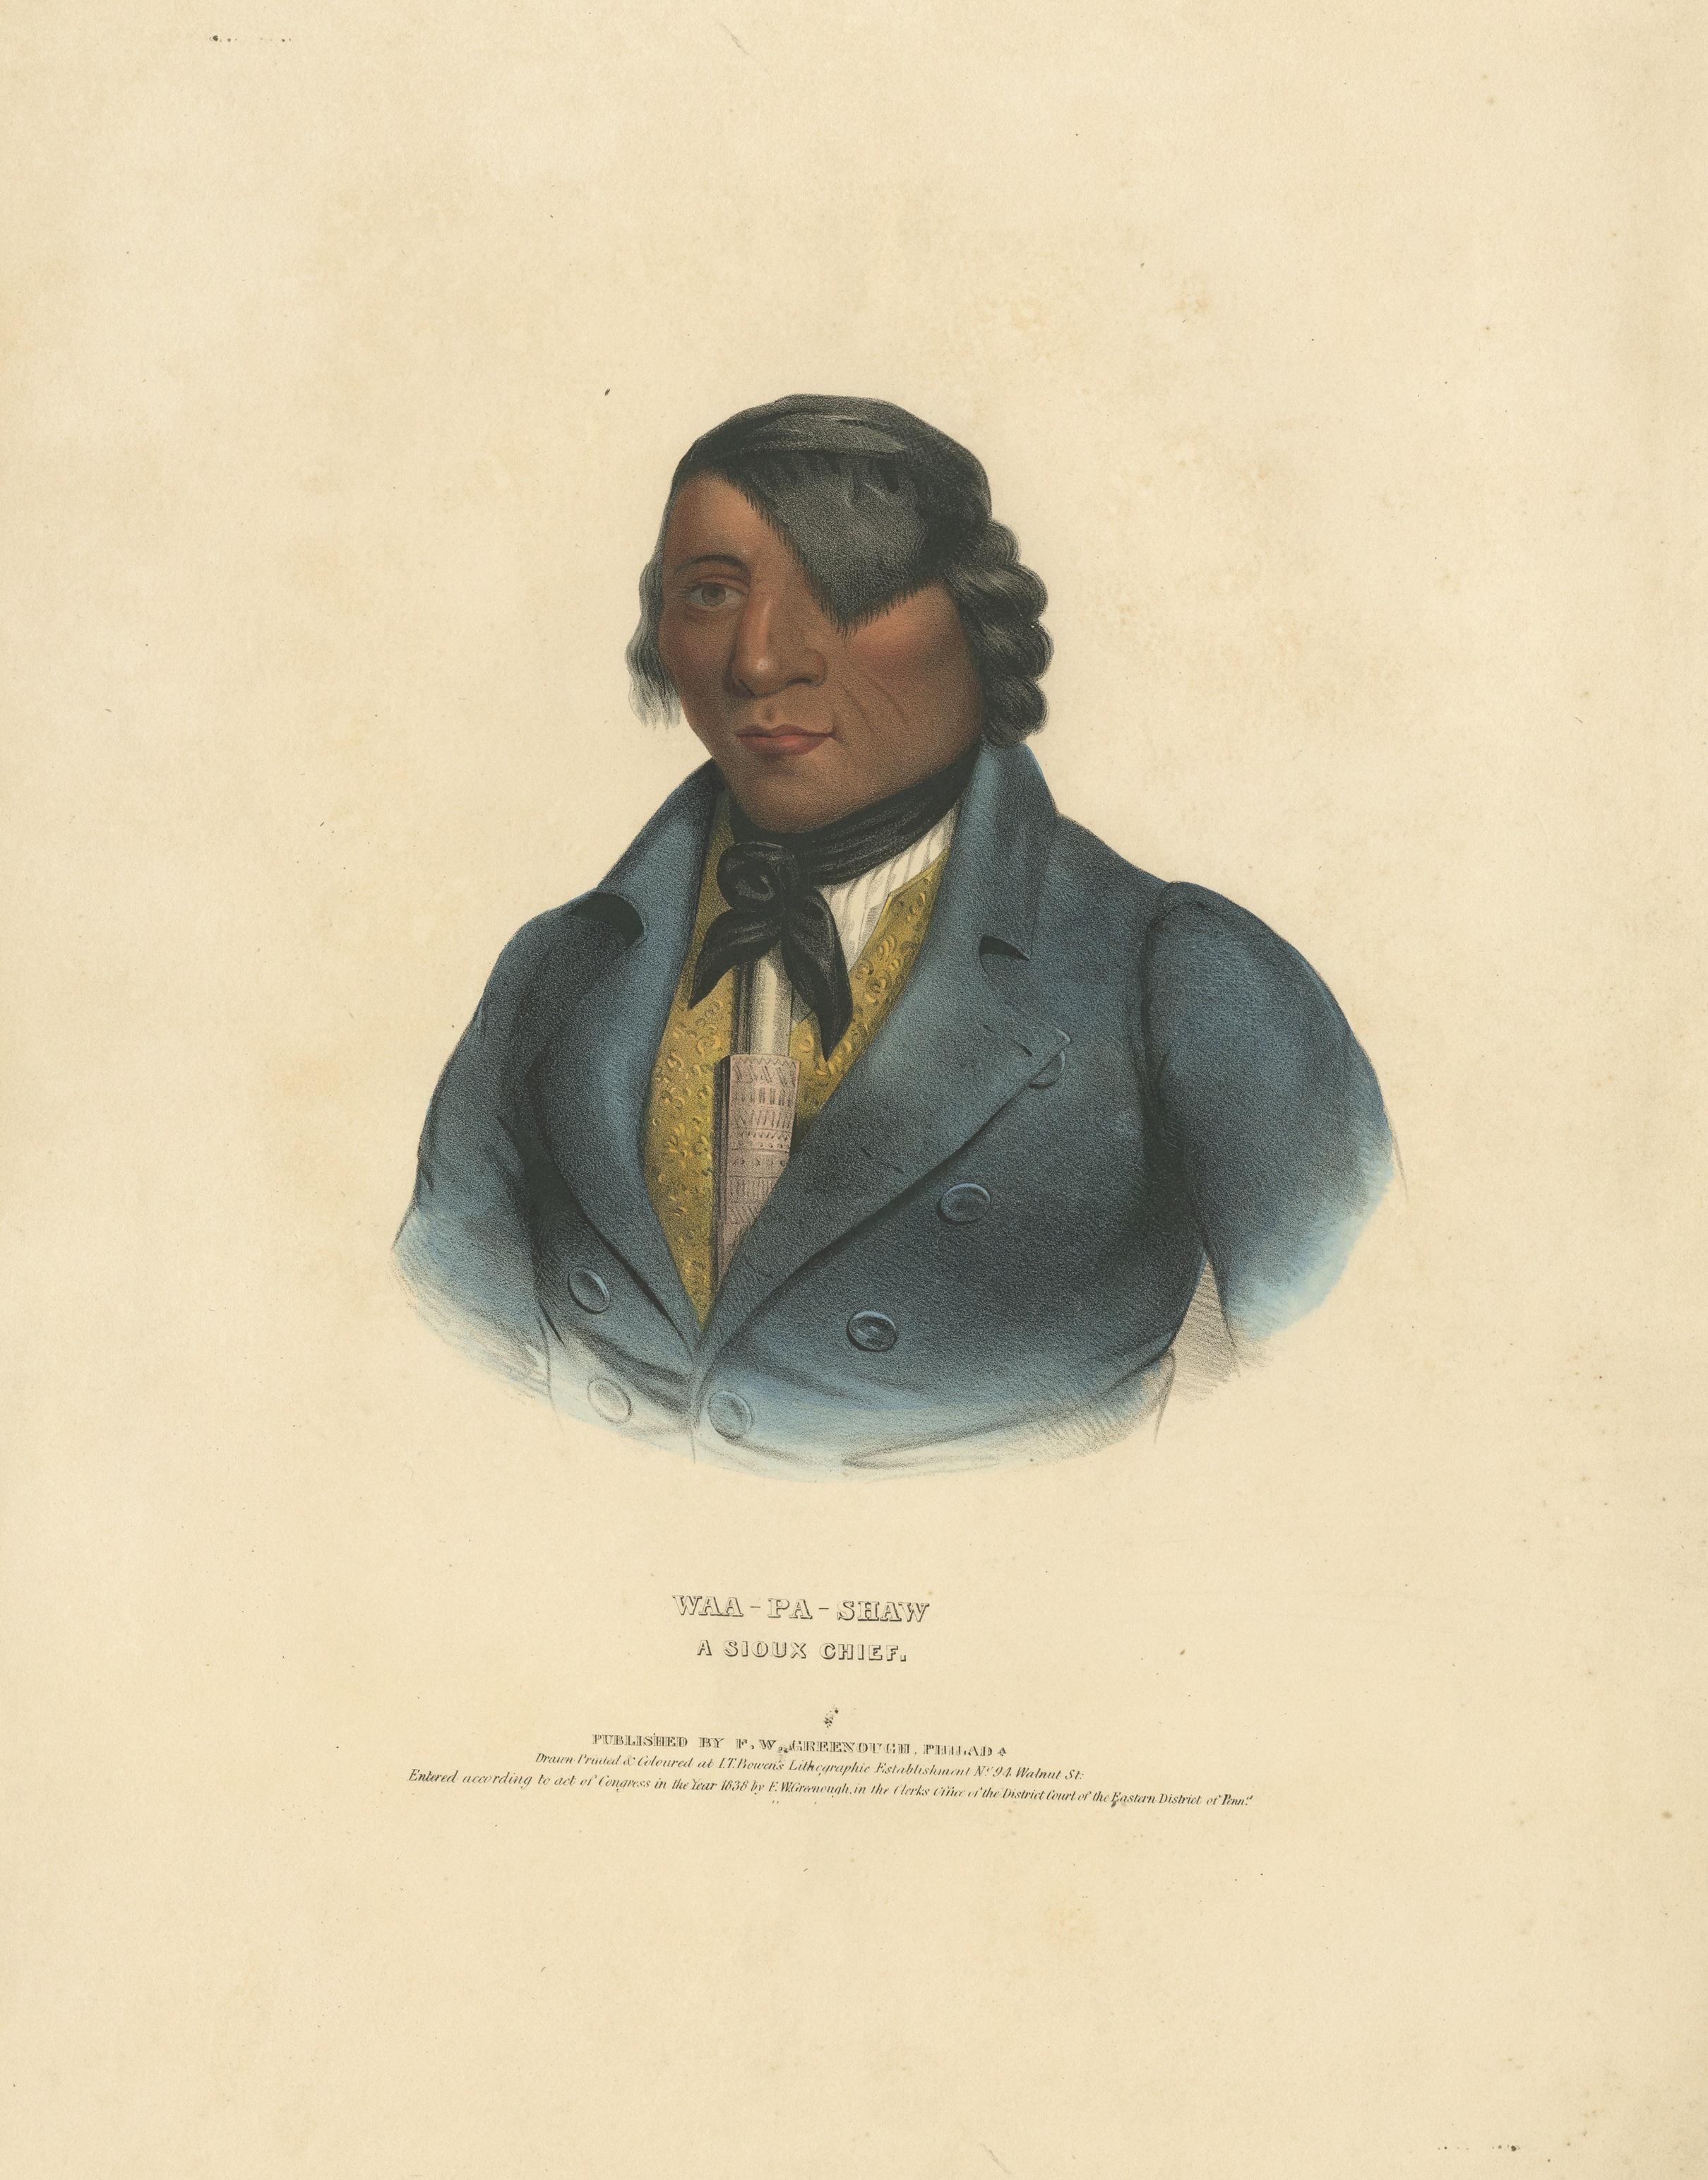 Waa-Pa-Shaw: The Stately Sioux Chief

This lithograph is titled 